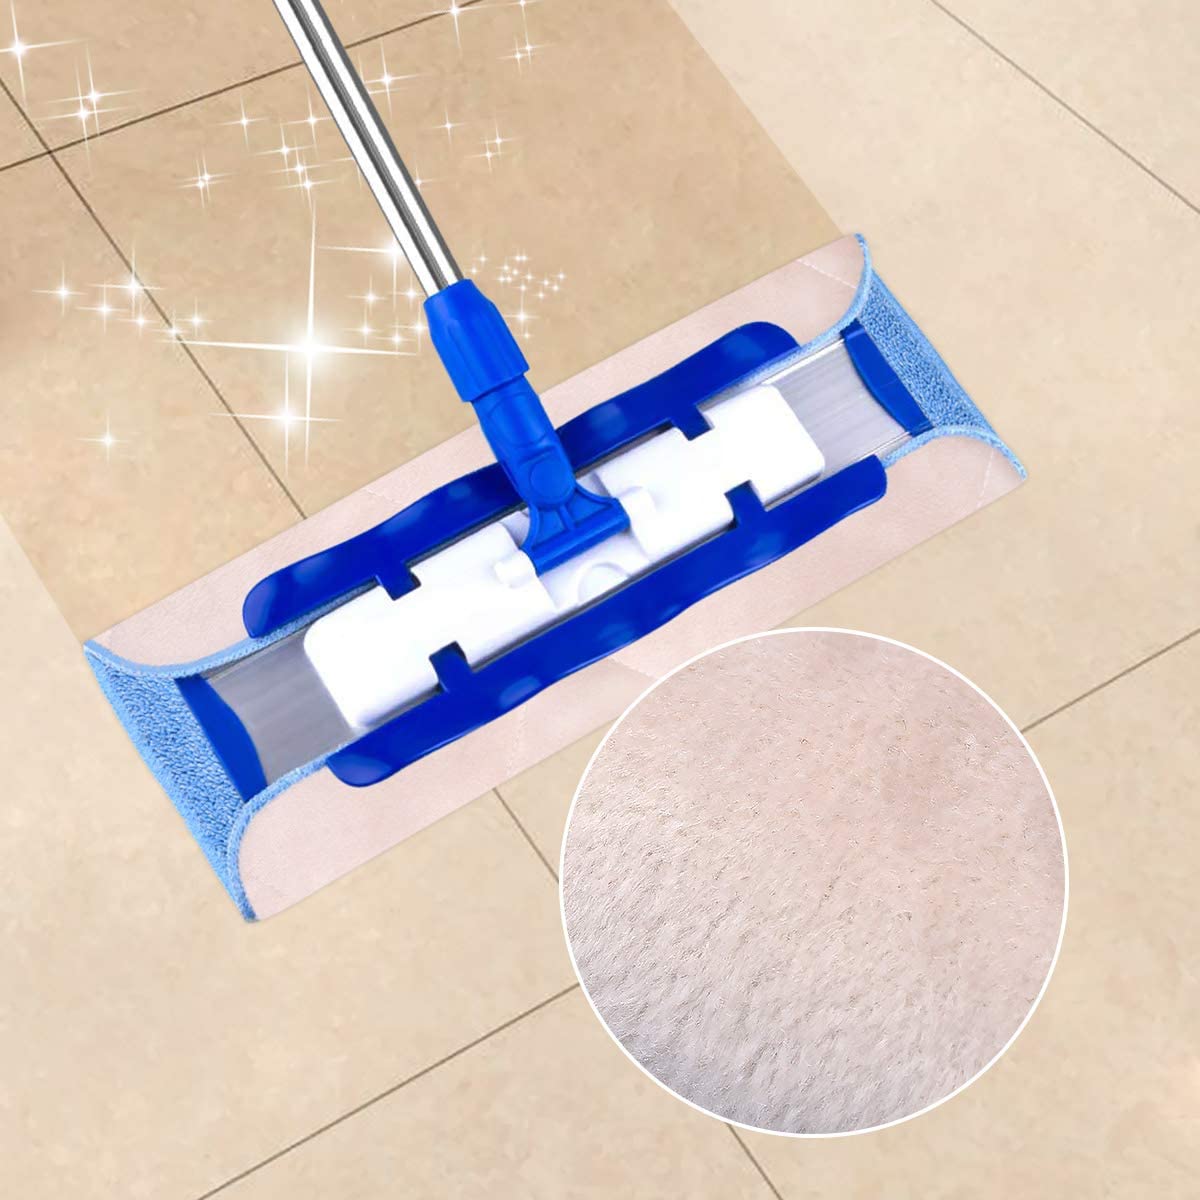 KEEPOW Professional Microfiber Mop Double Side use Wet & Dry Mopping,